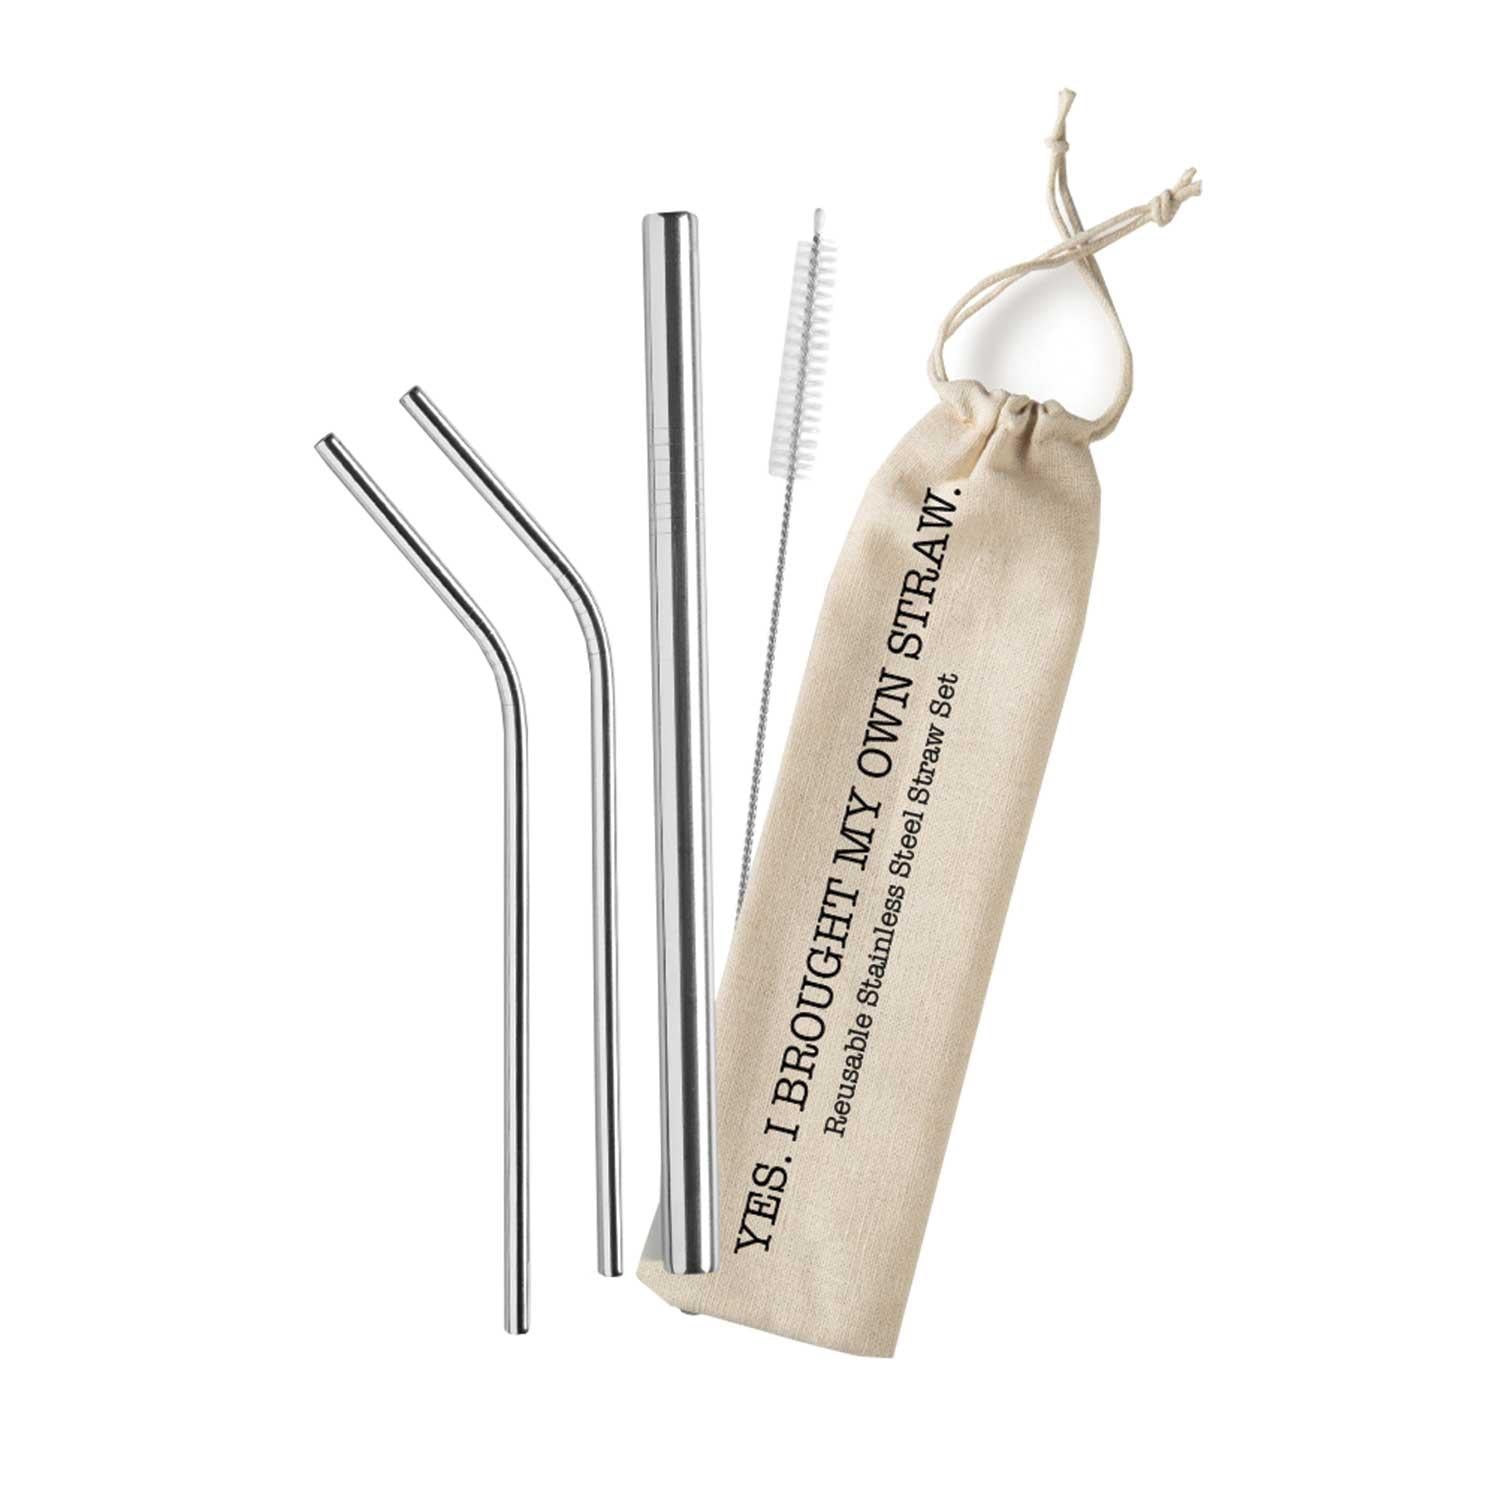 Reusable Stainless Steel Straw Set